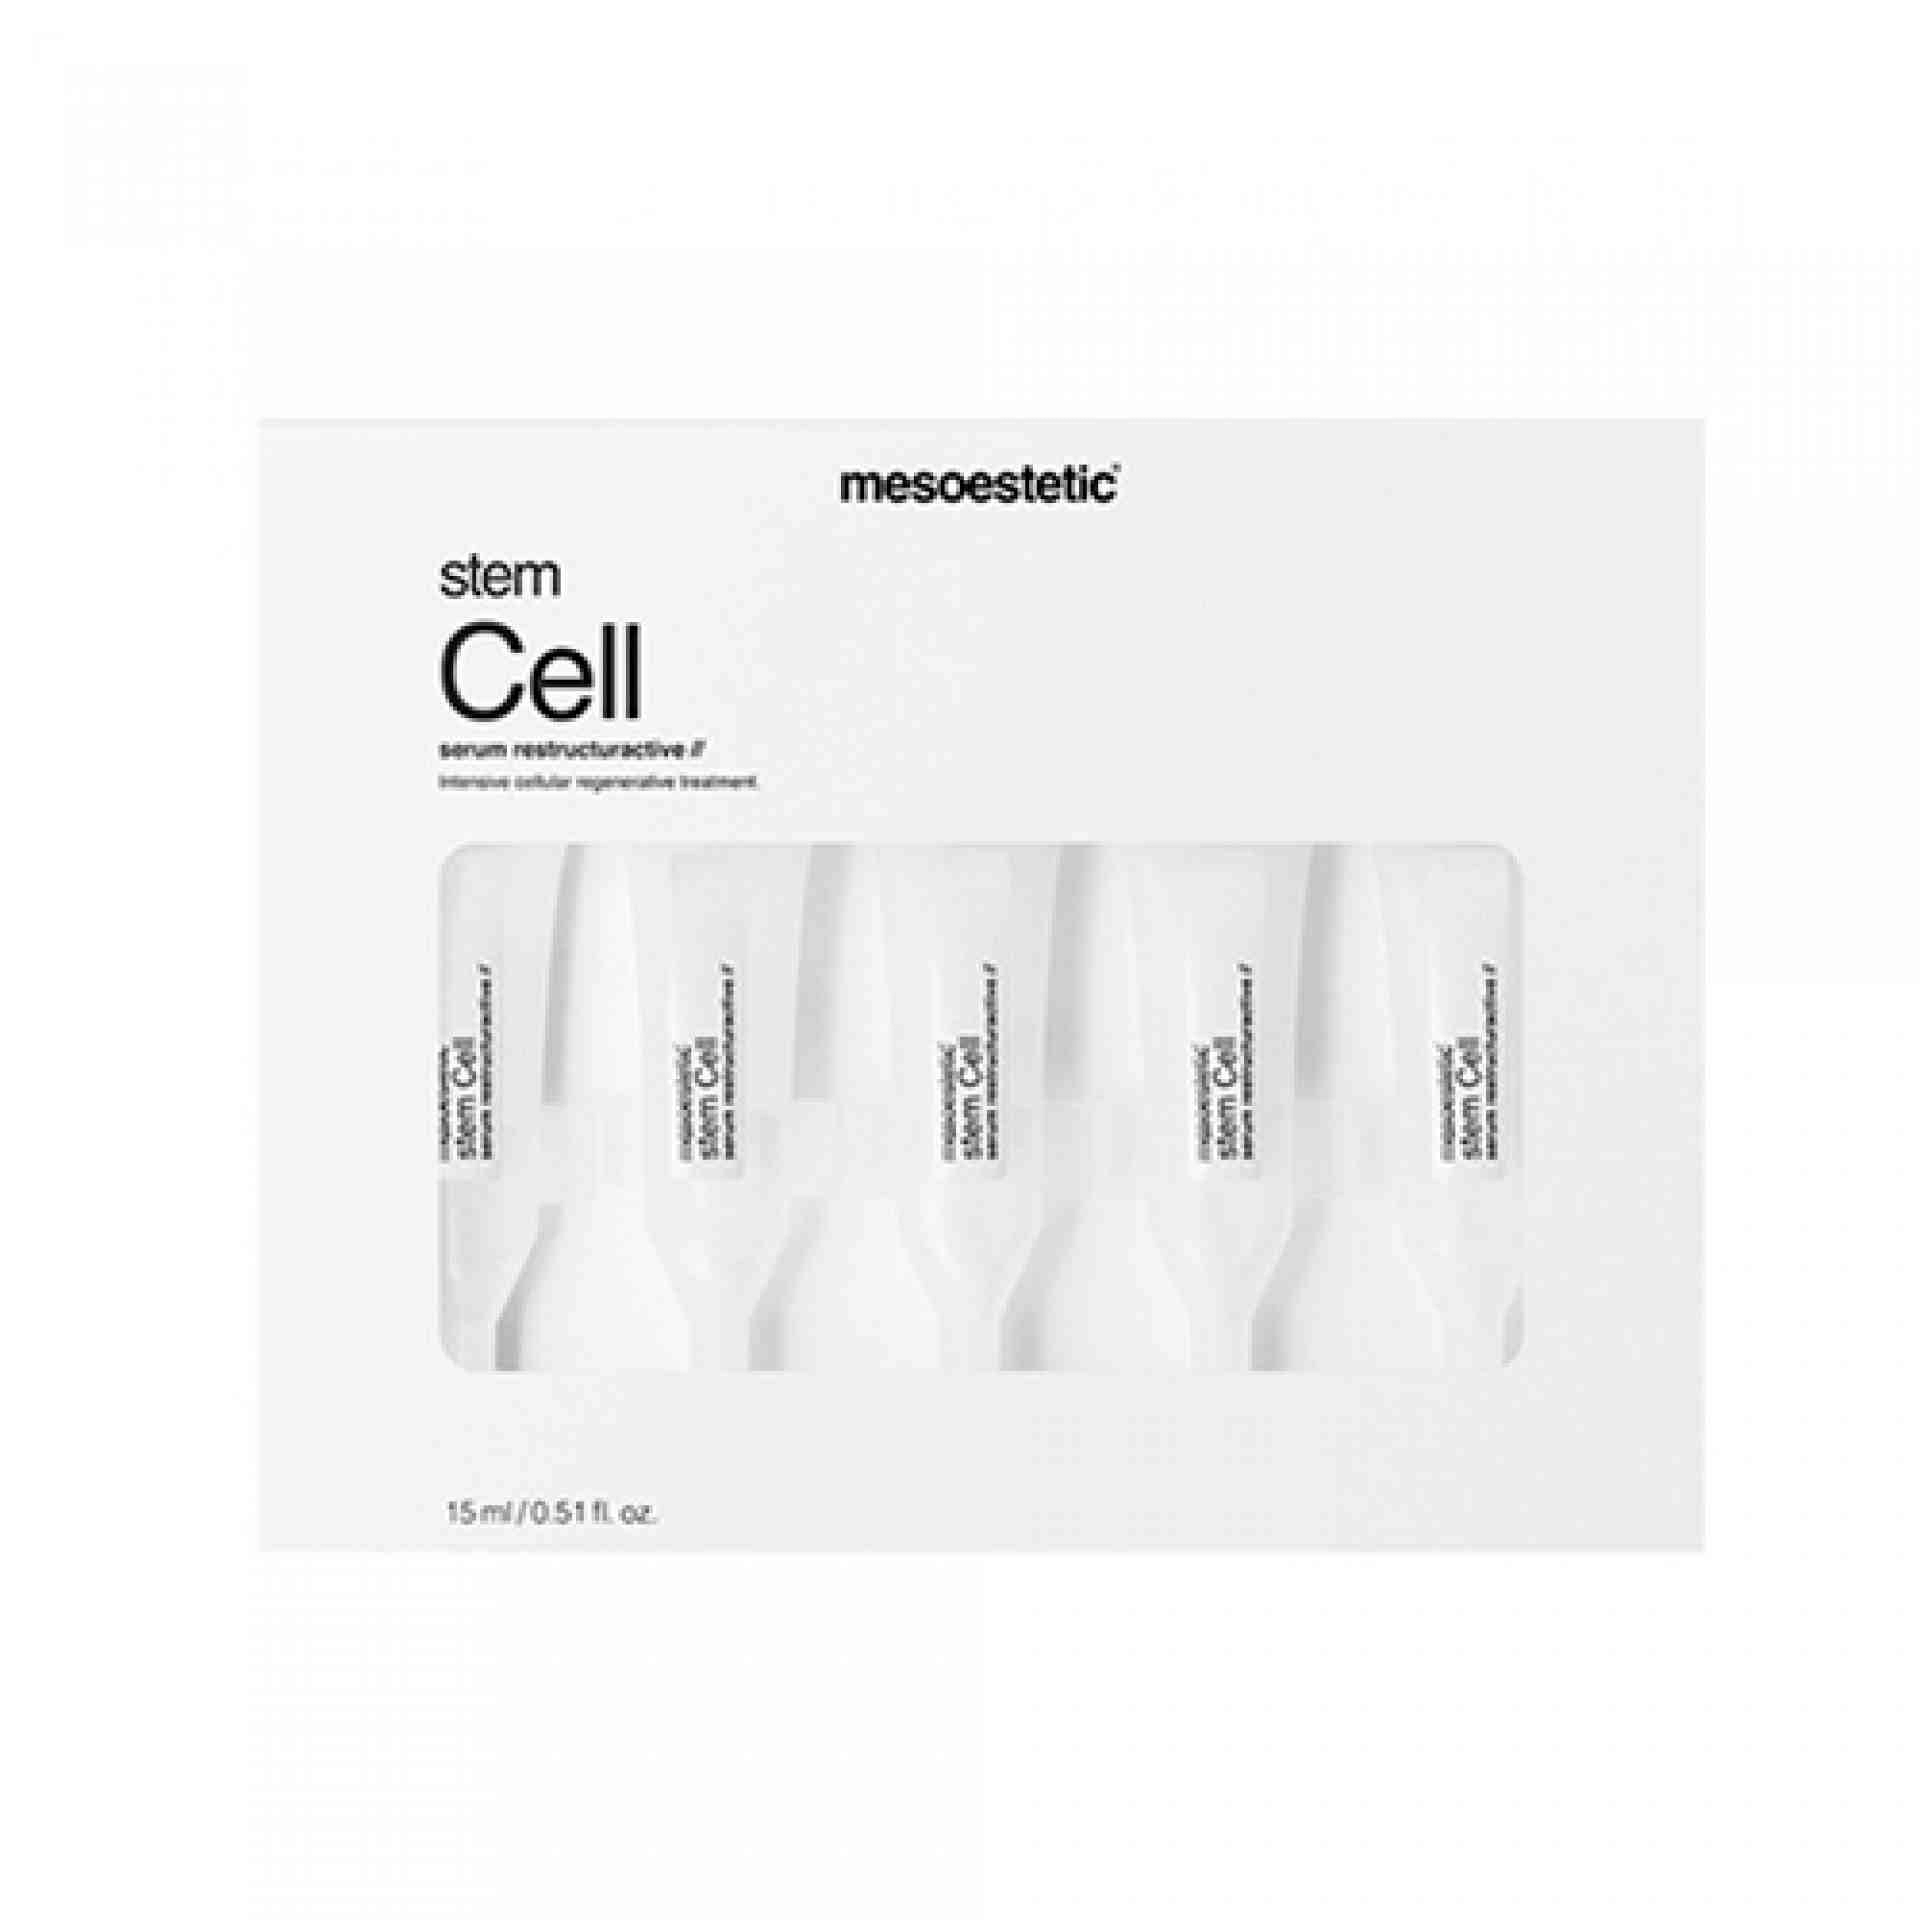 Stem Cell Serum Restructurative | Serum Ultraconcentrado 5x3ml - Mesoestetic ®